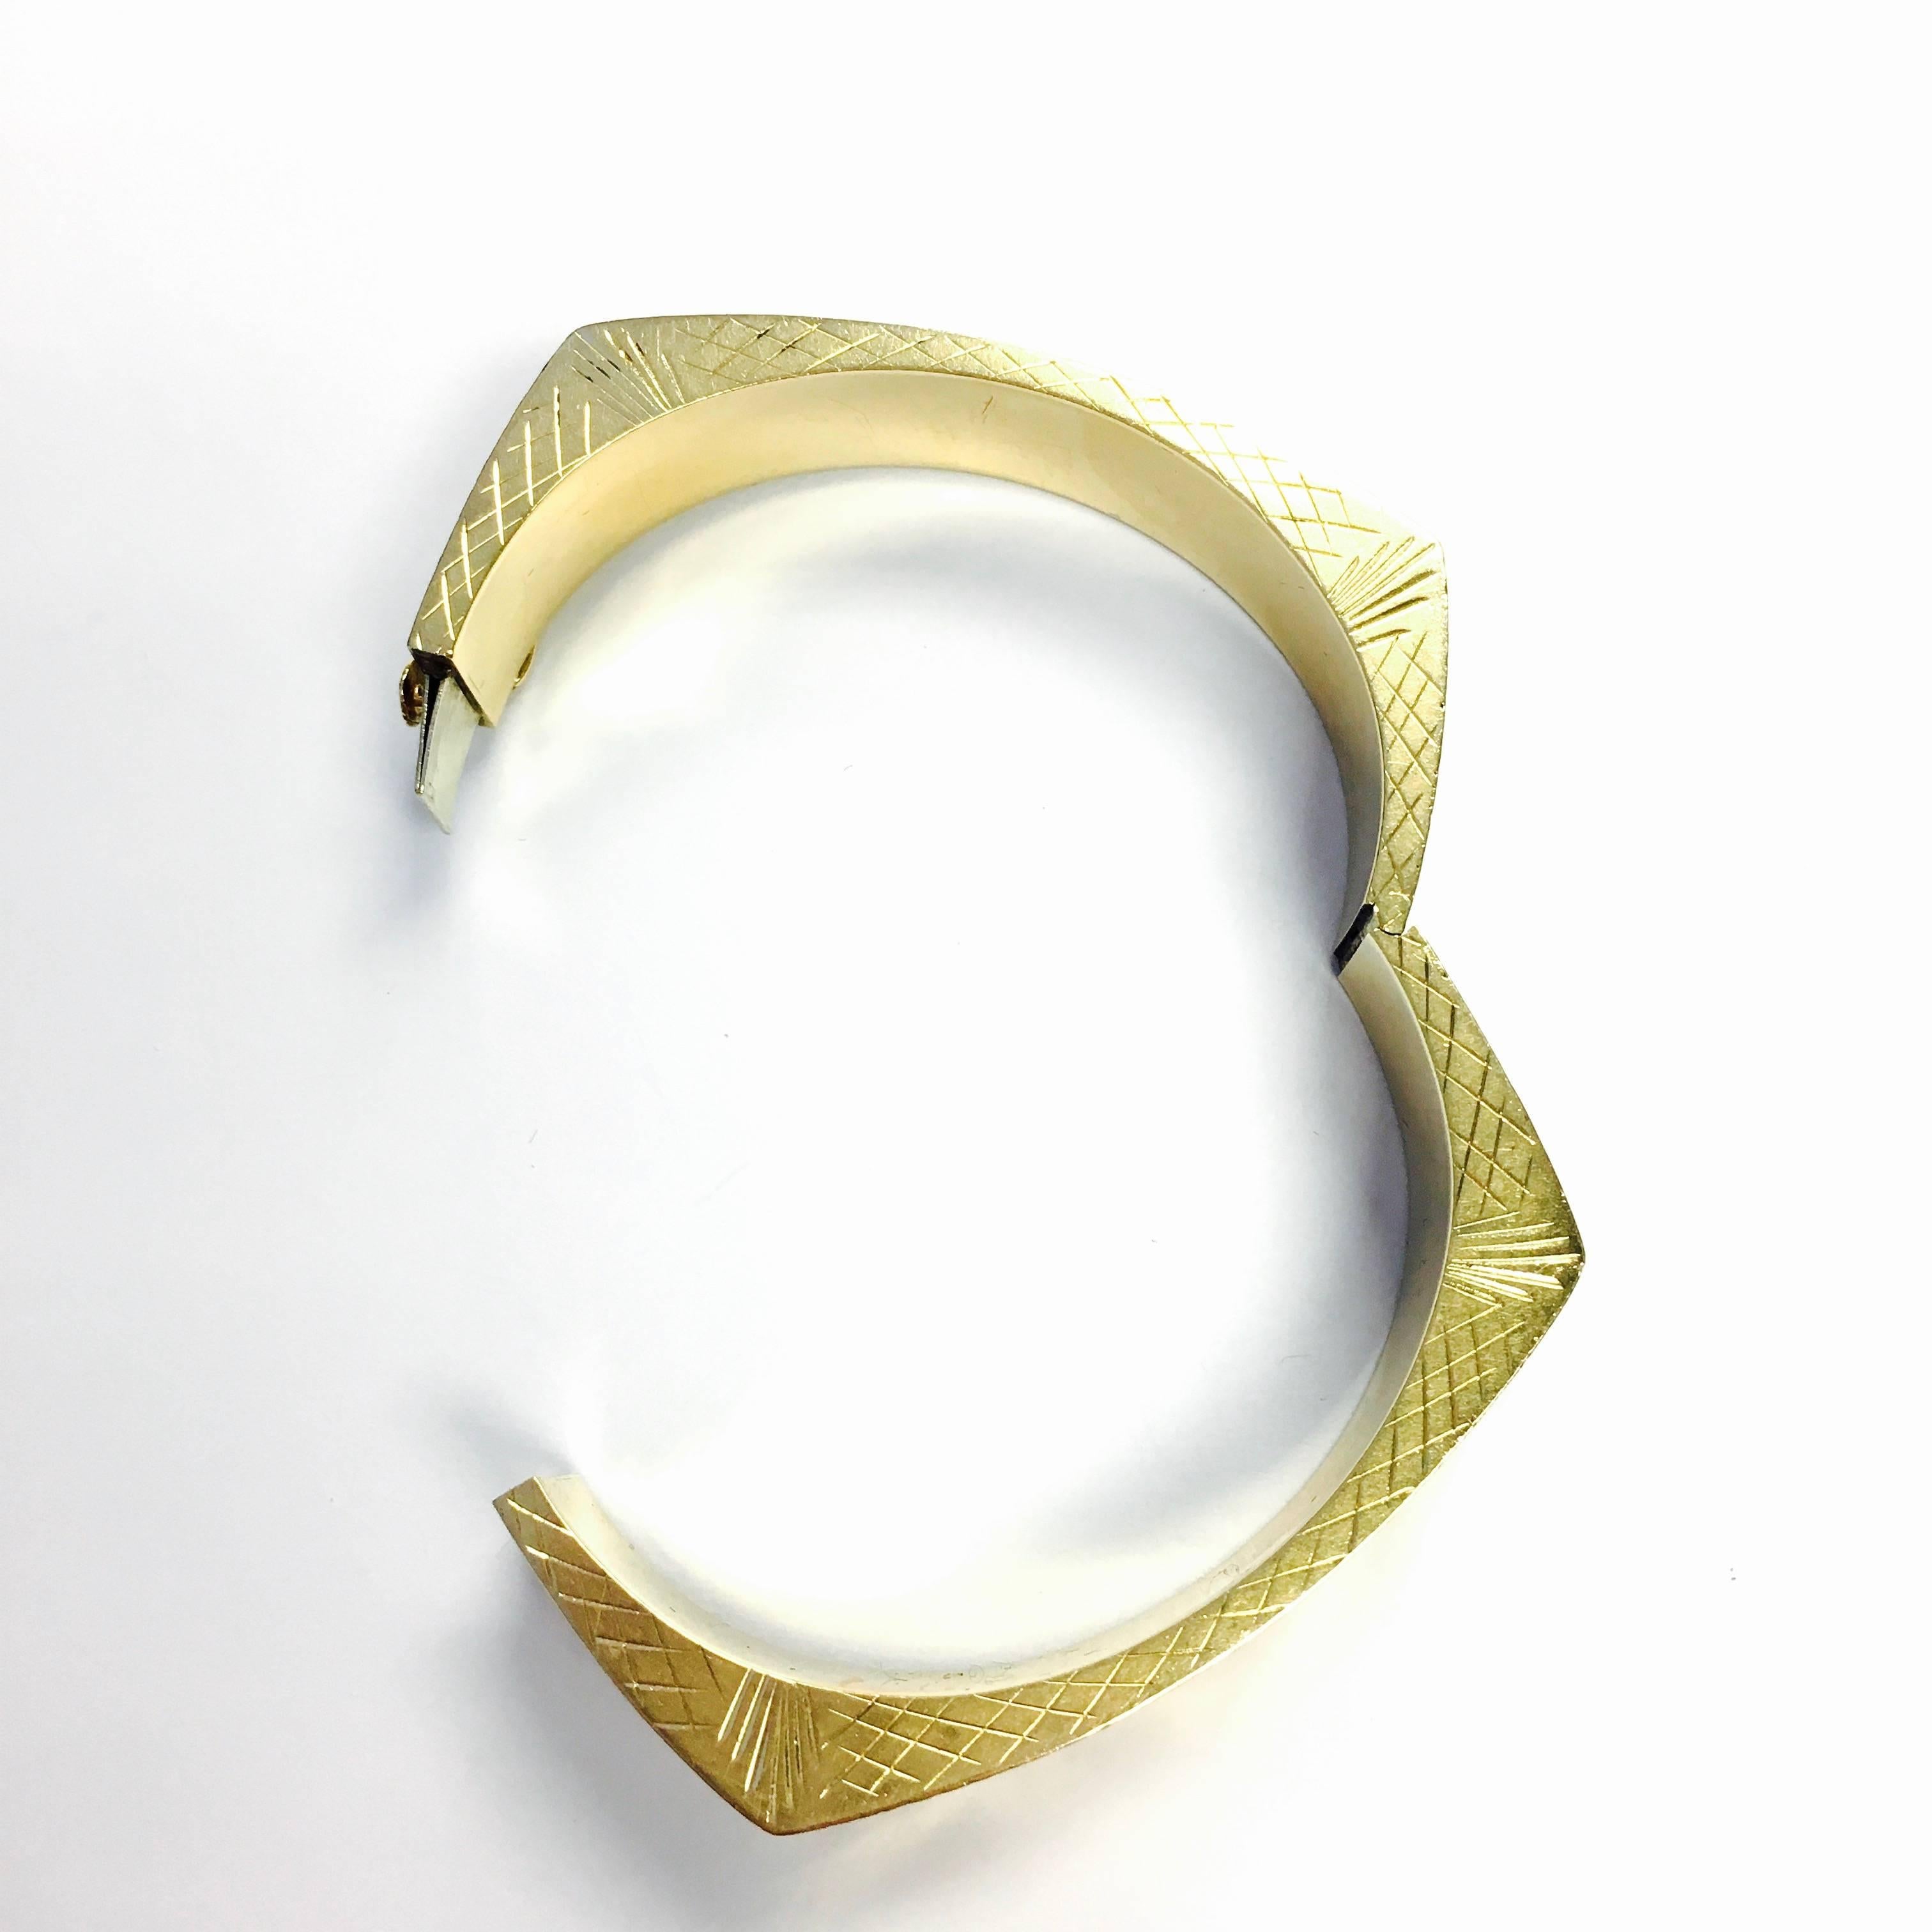 14K yellow gold square, hollow bangle bracelet with laser cut finish. 
Measurements:
Width: approx. 1/2 